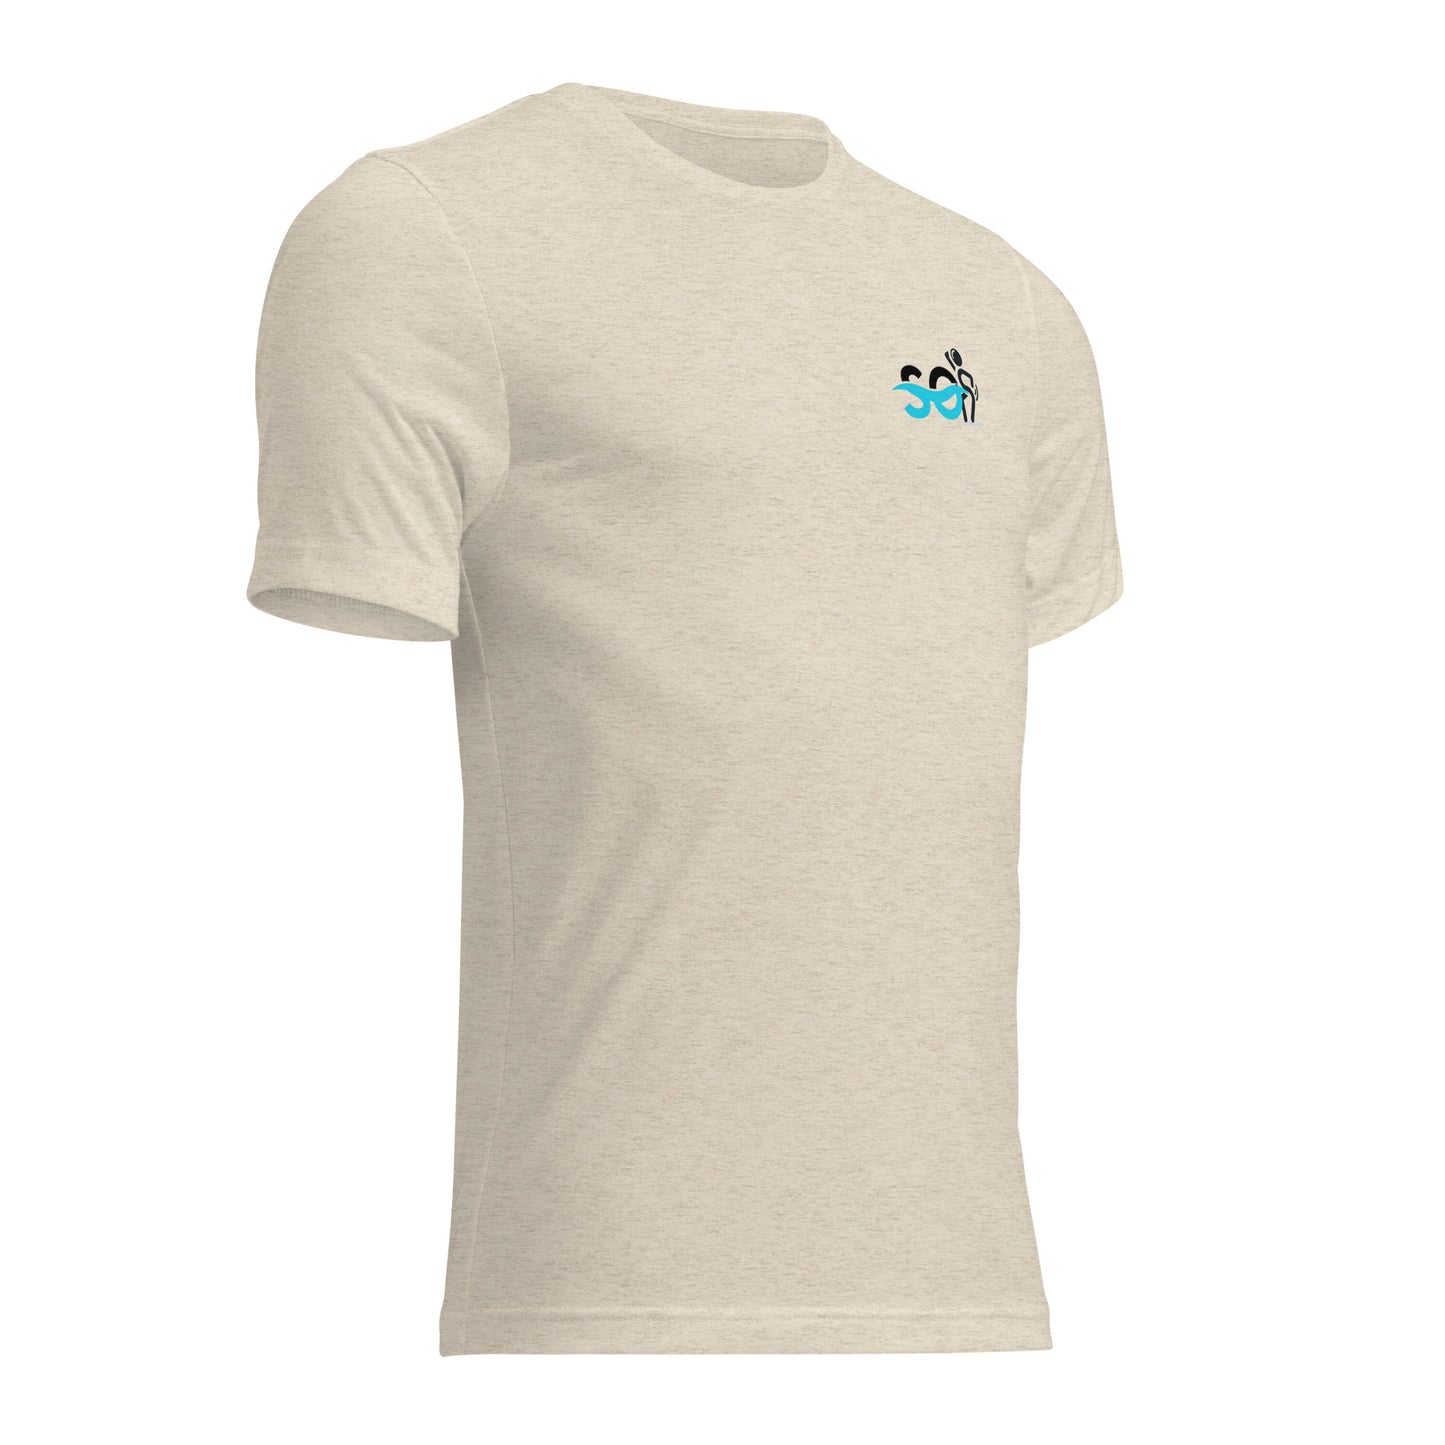 a white t - shirt with a blue bird on it